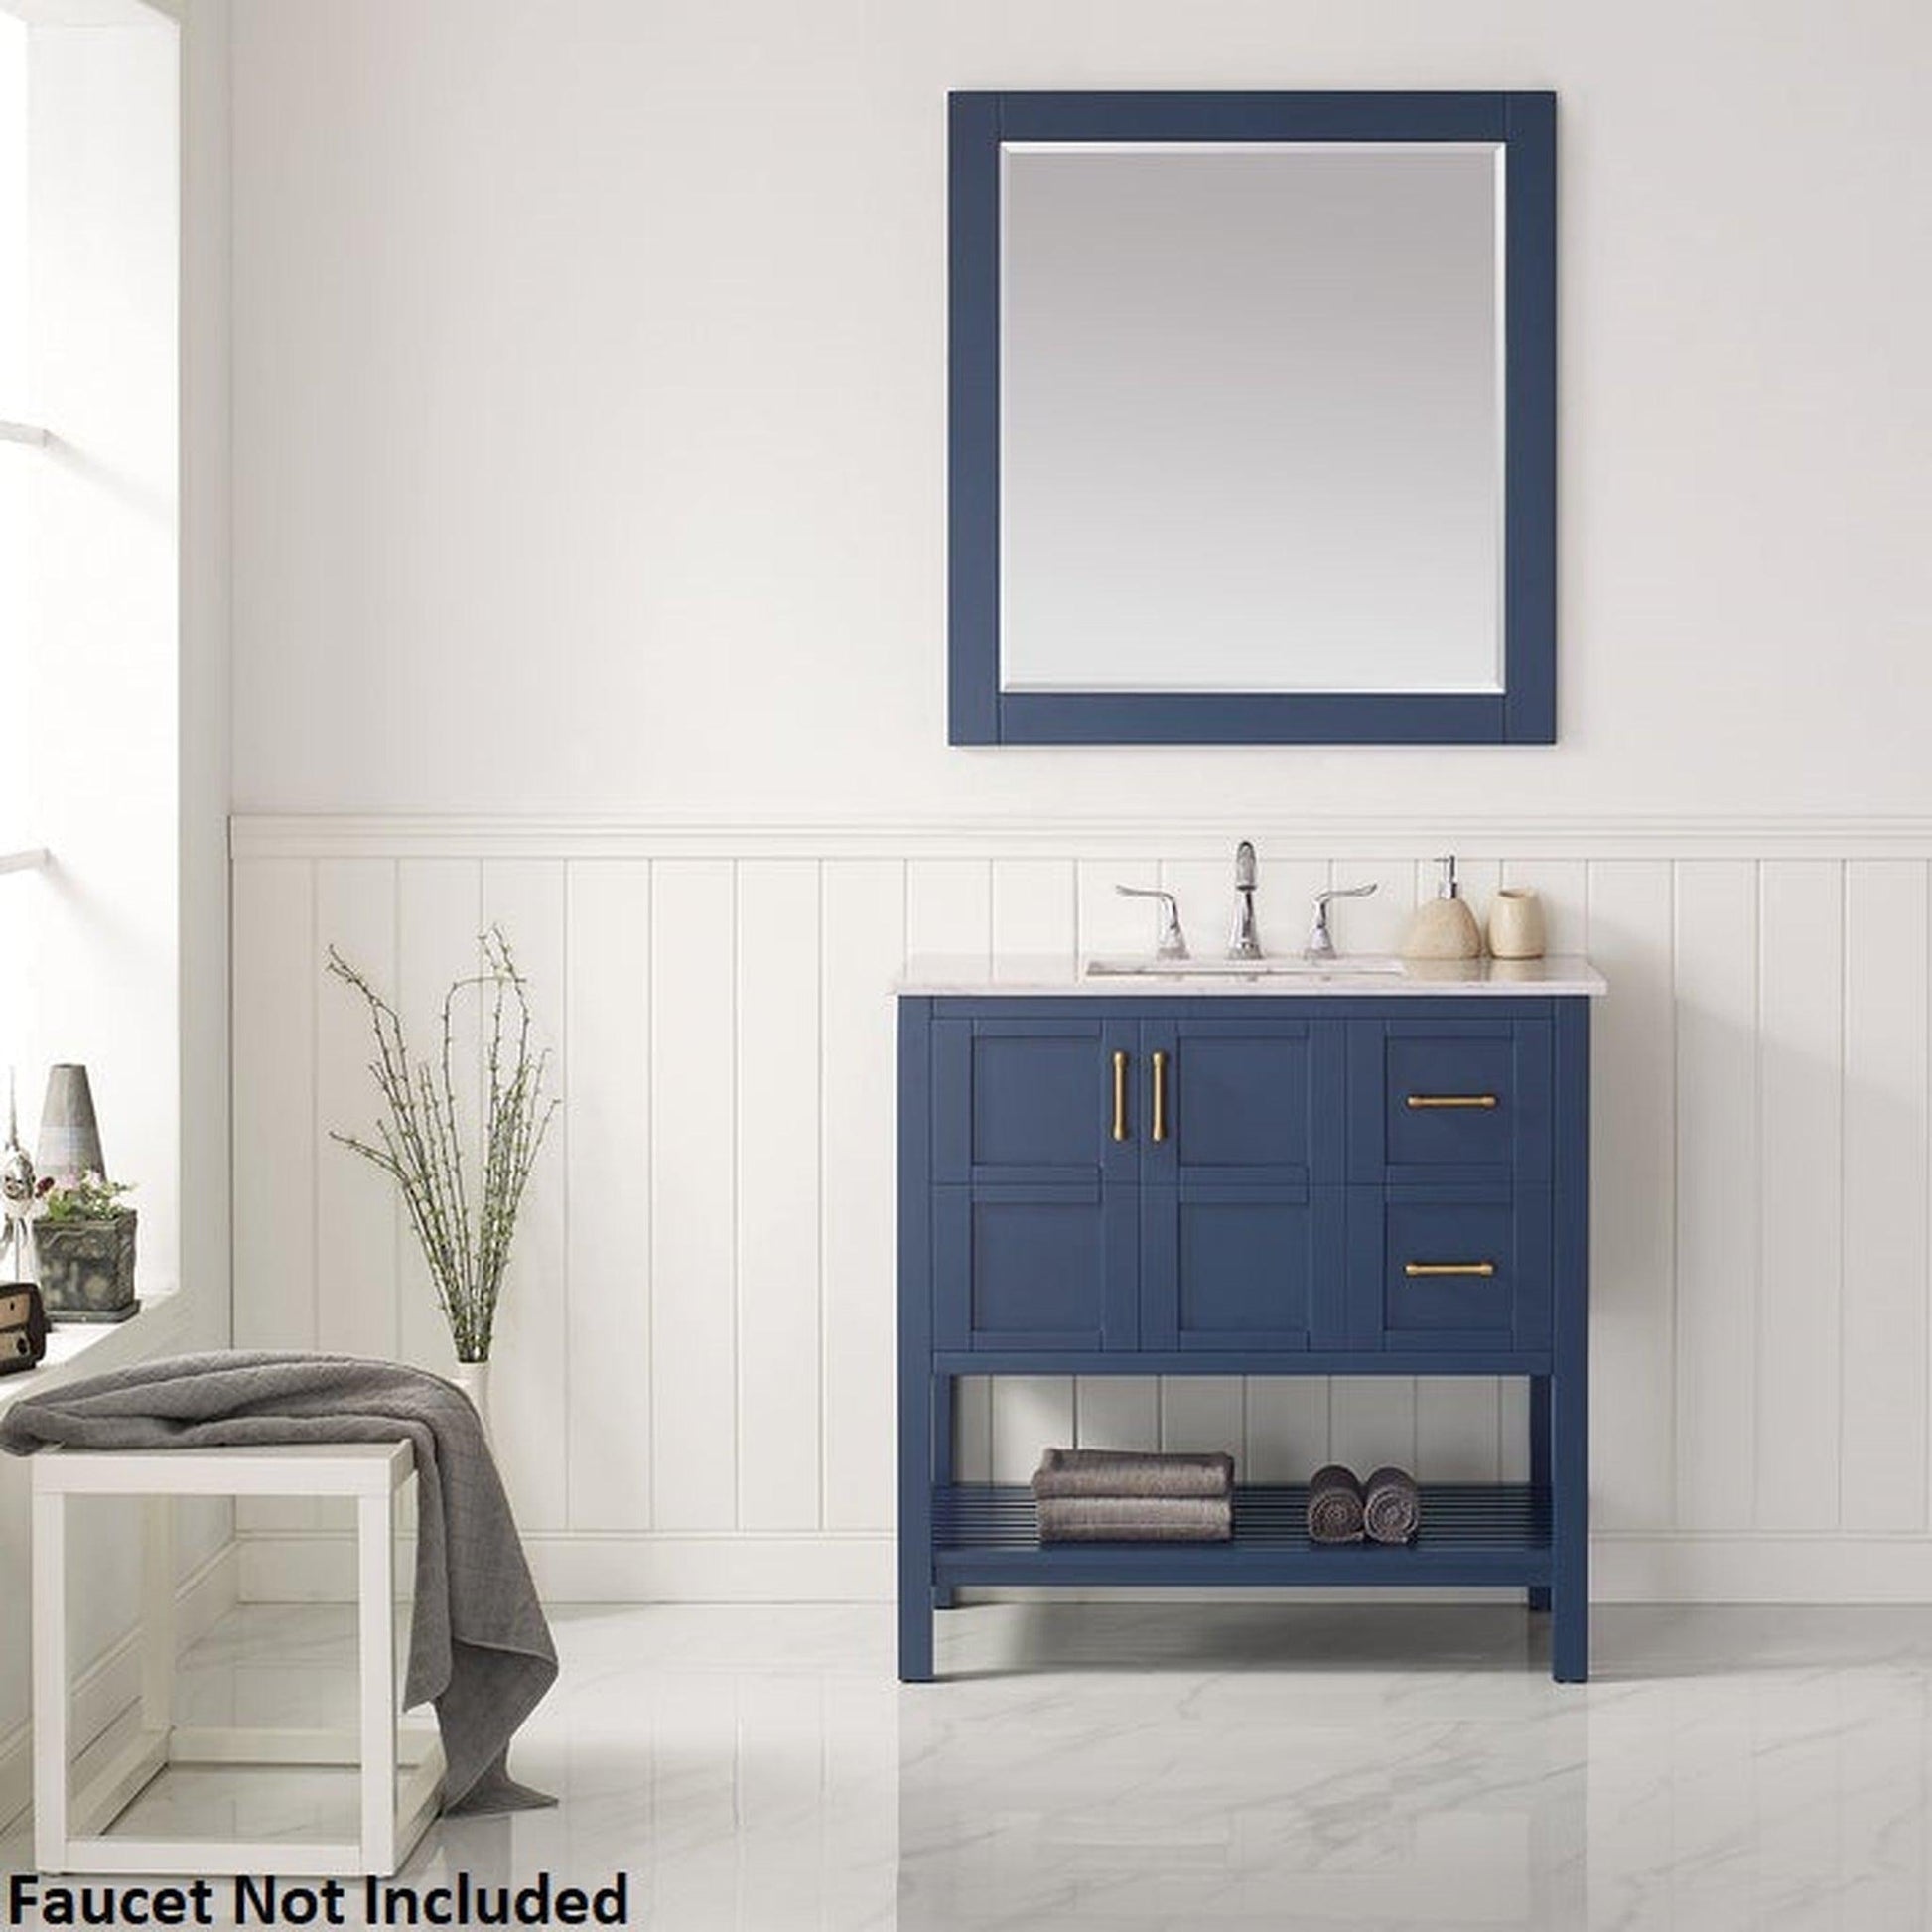 Vinnova Florence 36" Royal Blue Freestanding Single Vanity Set In White Carrara Marble Top With Undermount Ceramic Sink and Mirror